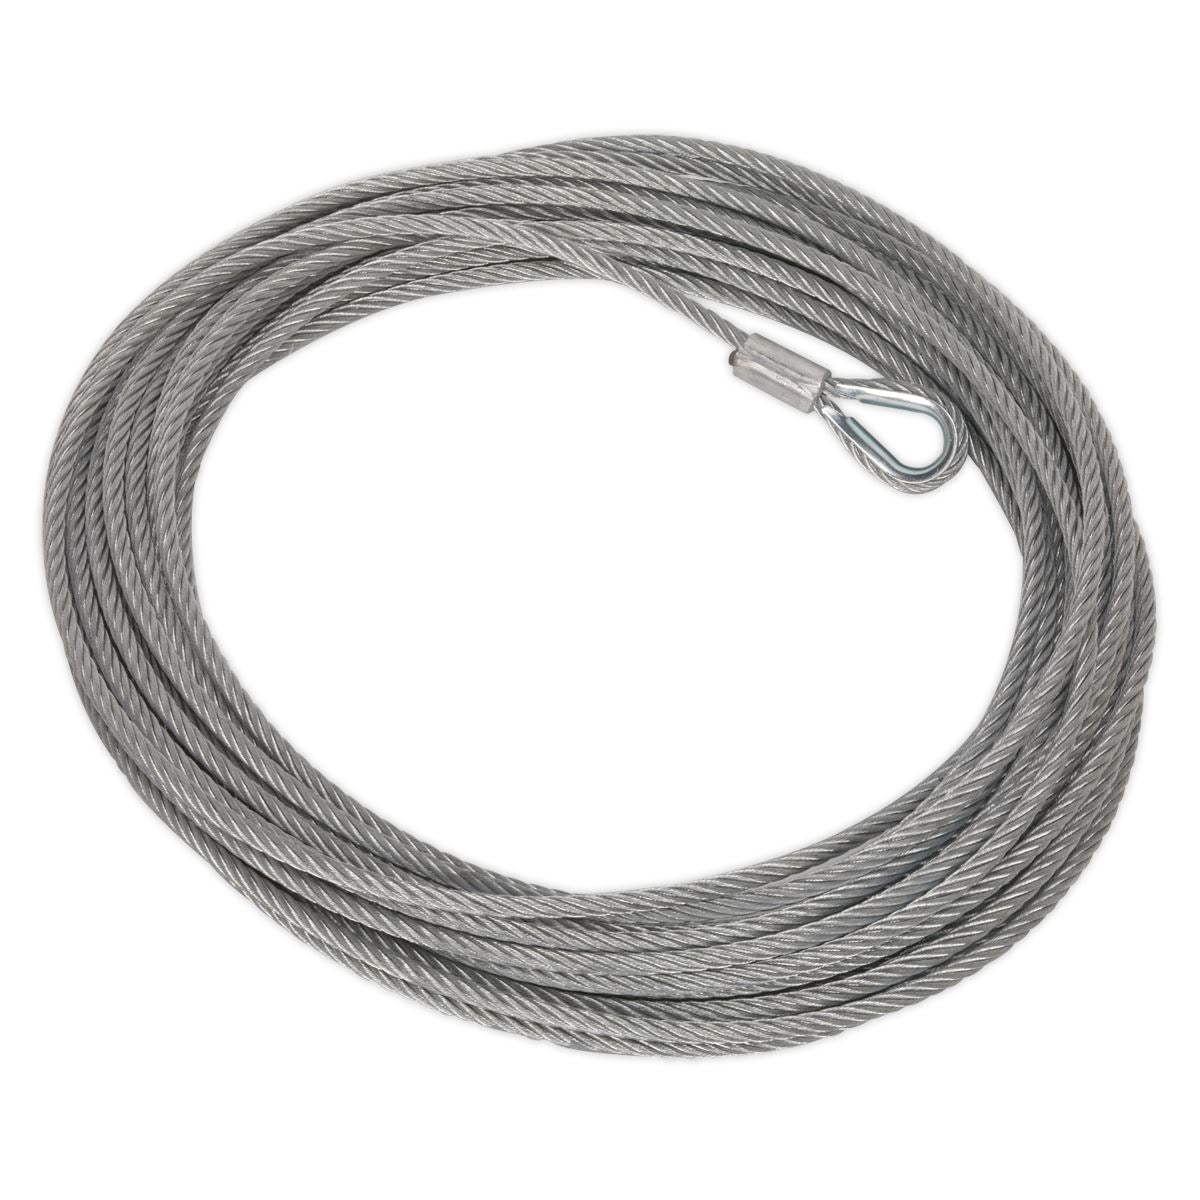 Sealey Wire Rope (Ø10.3mm x 29m) for RW5675